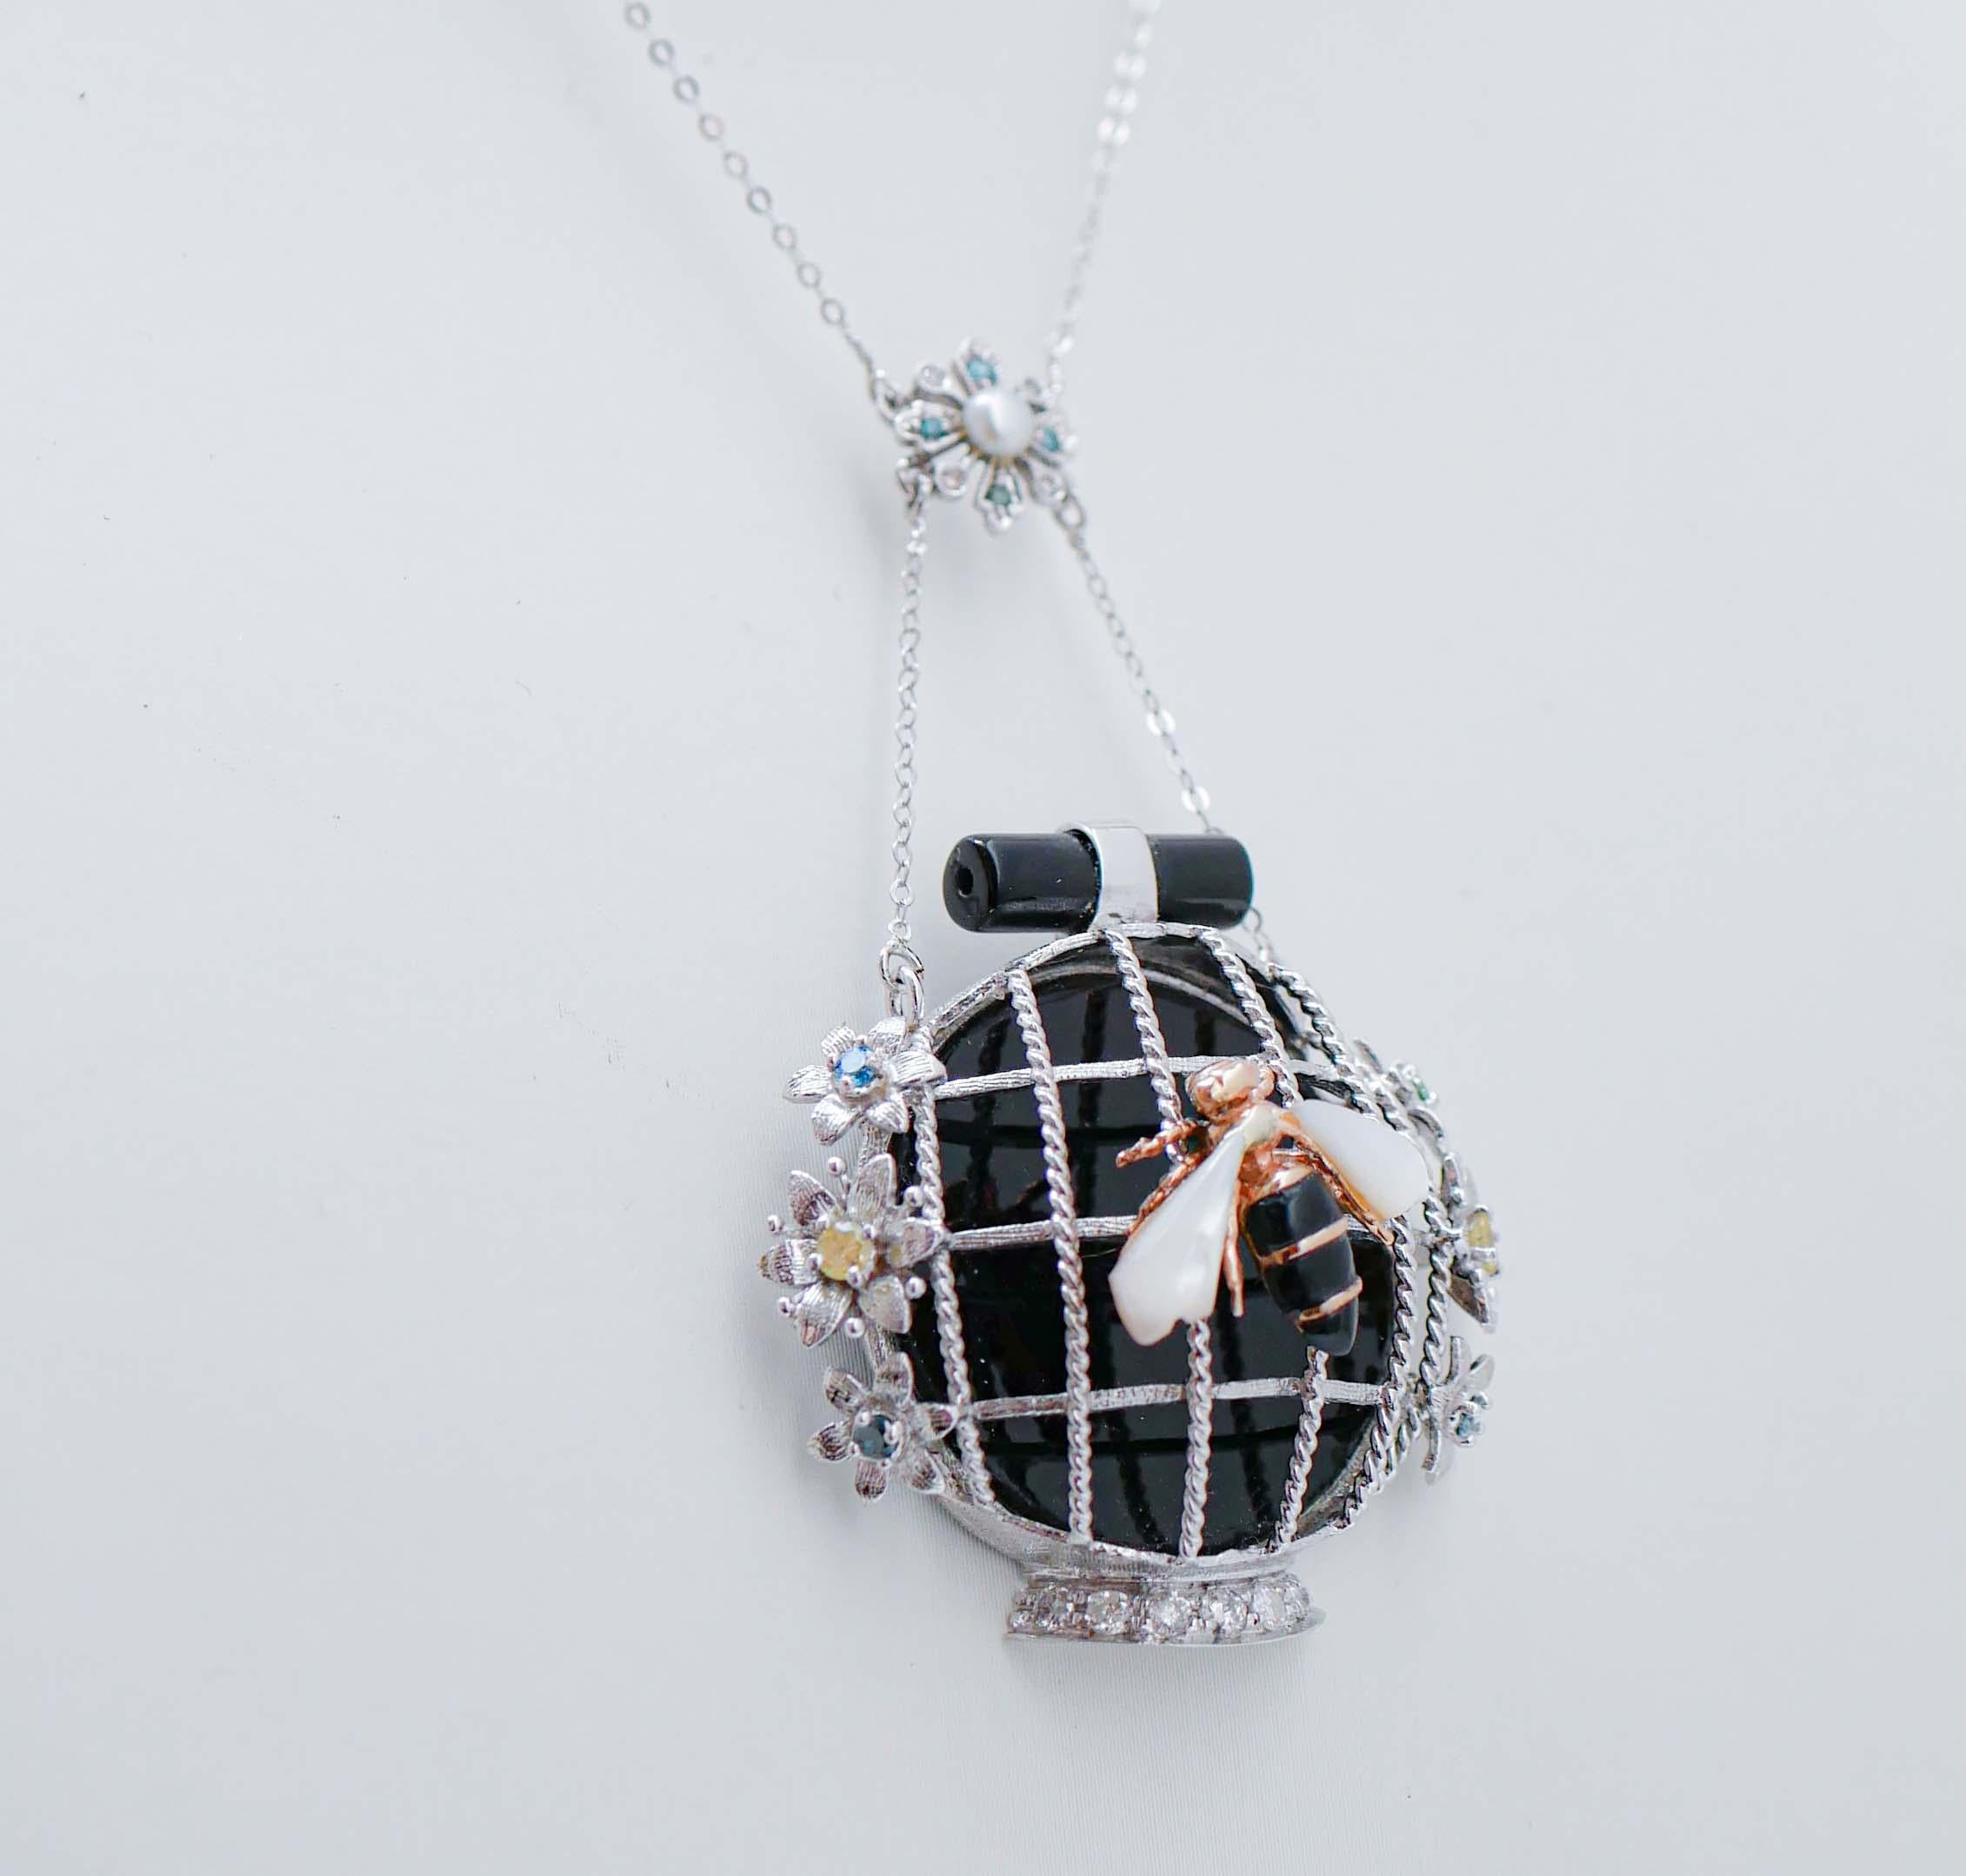 Retro White and Fancy Diamonds, Onyx, White Stones, 14 Kt  Gold Pendant Necklace. For Sale